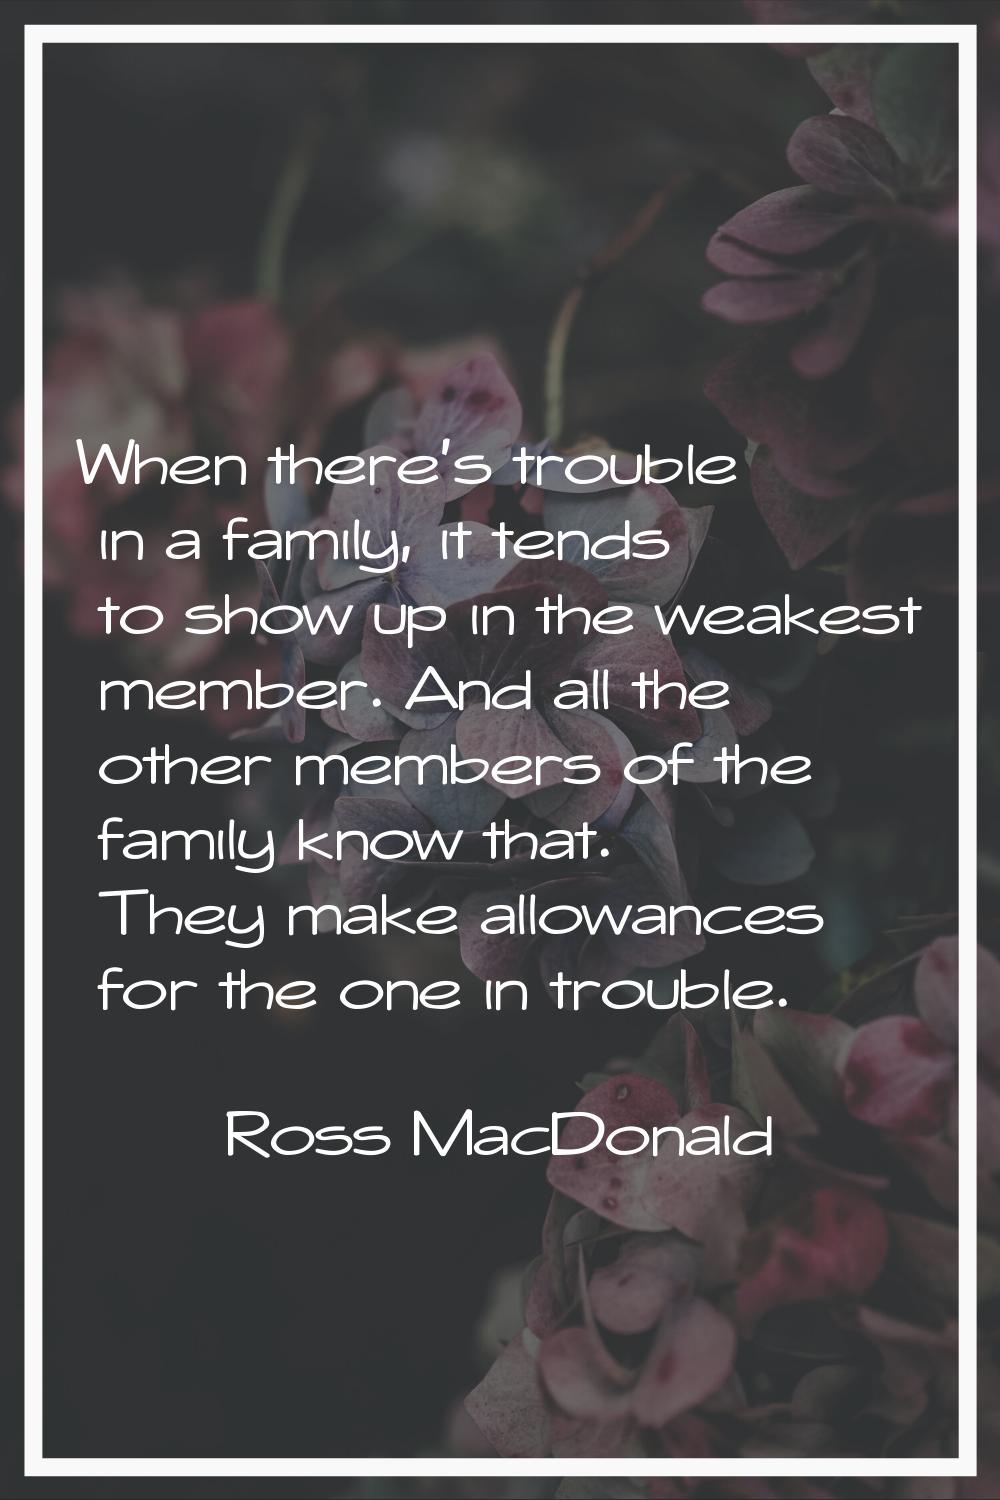 When there's trouble in a family, it tends to show up in the weakest member. And all the other memb